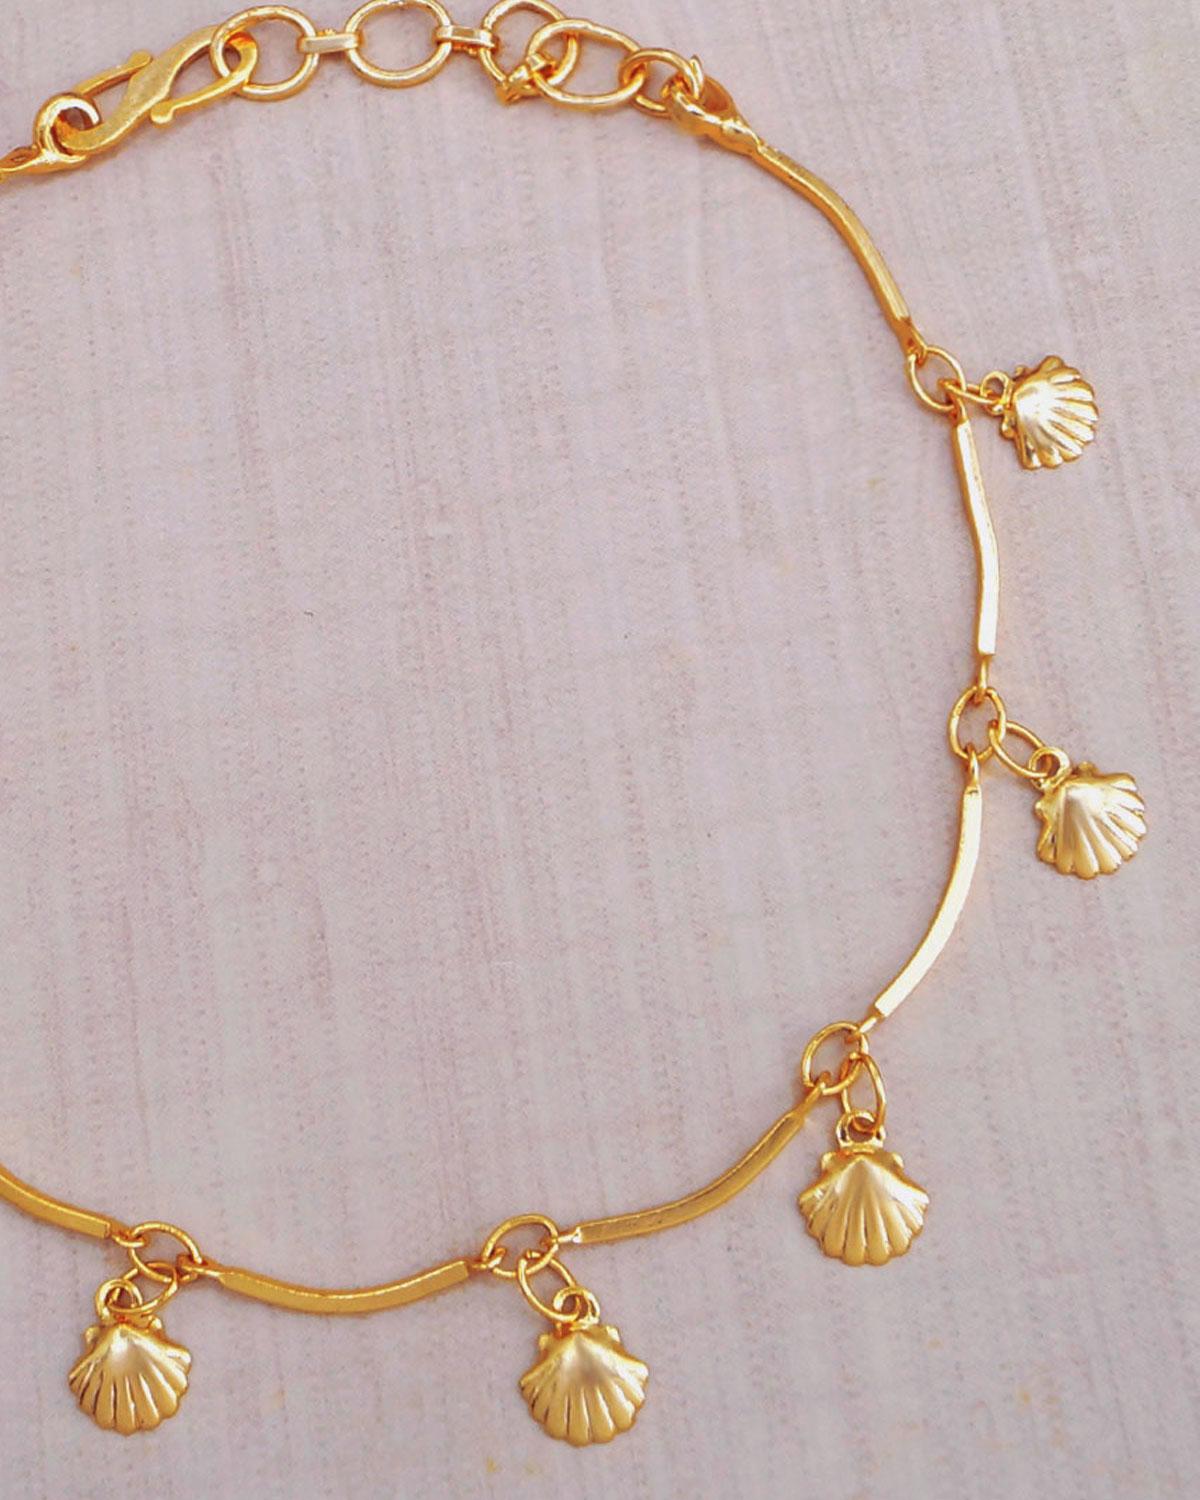 Latest Gold Collection Bracelet Design With Golden Sea Shells Hanging In The Bracelet